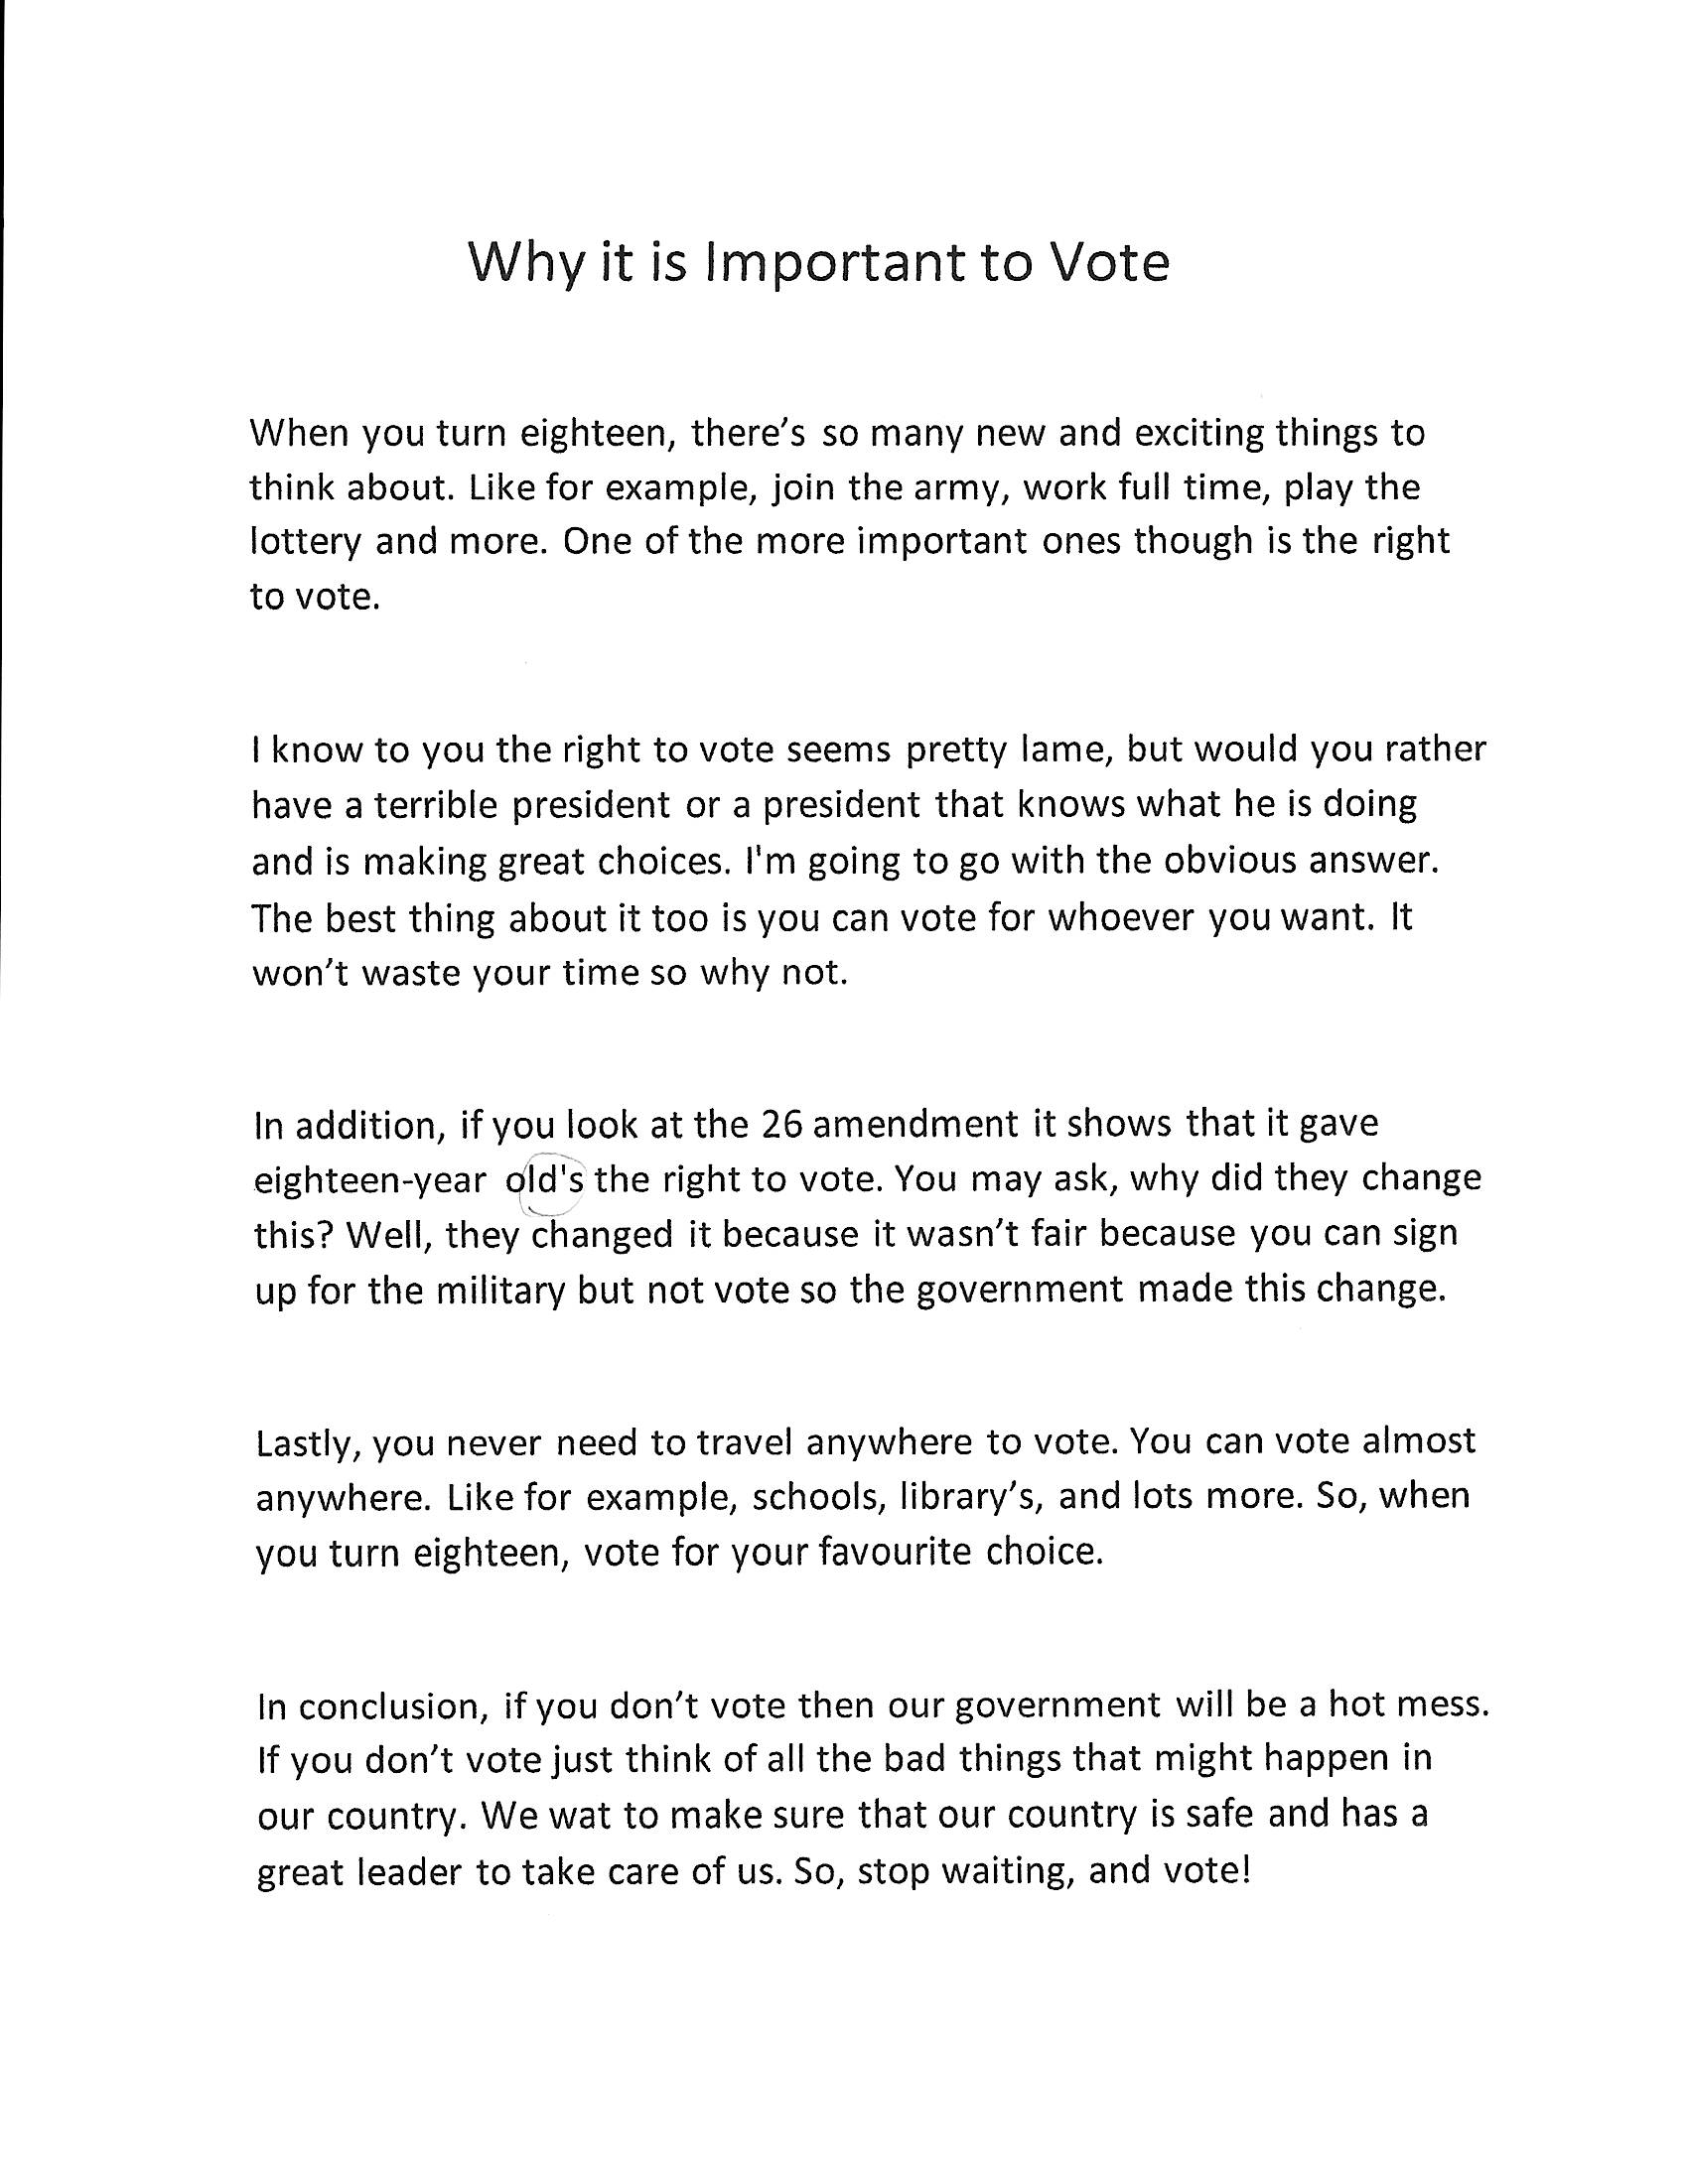 Importance of voting essay